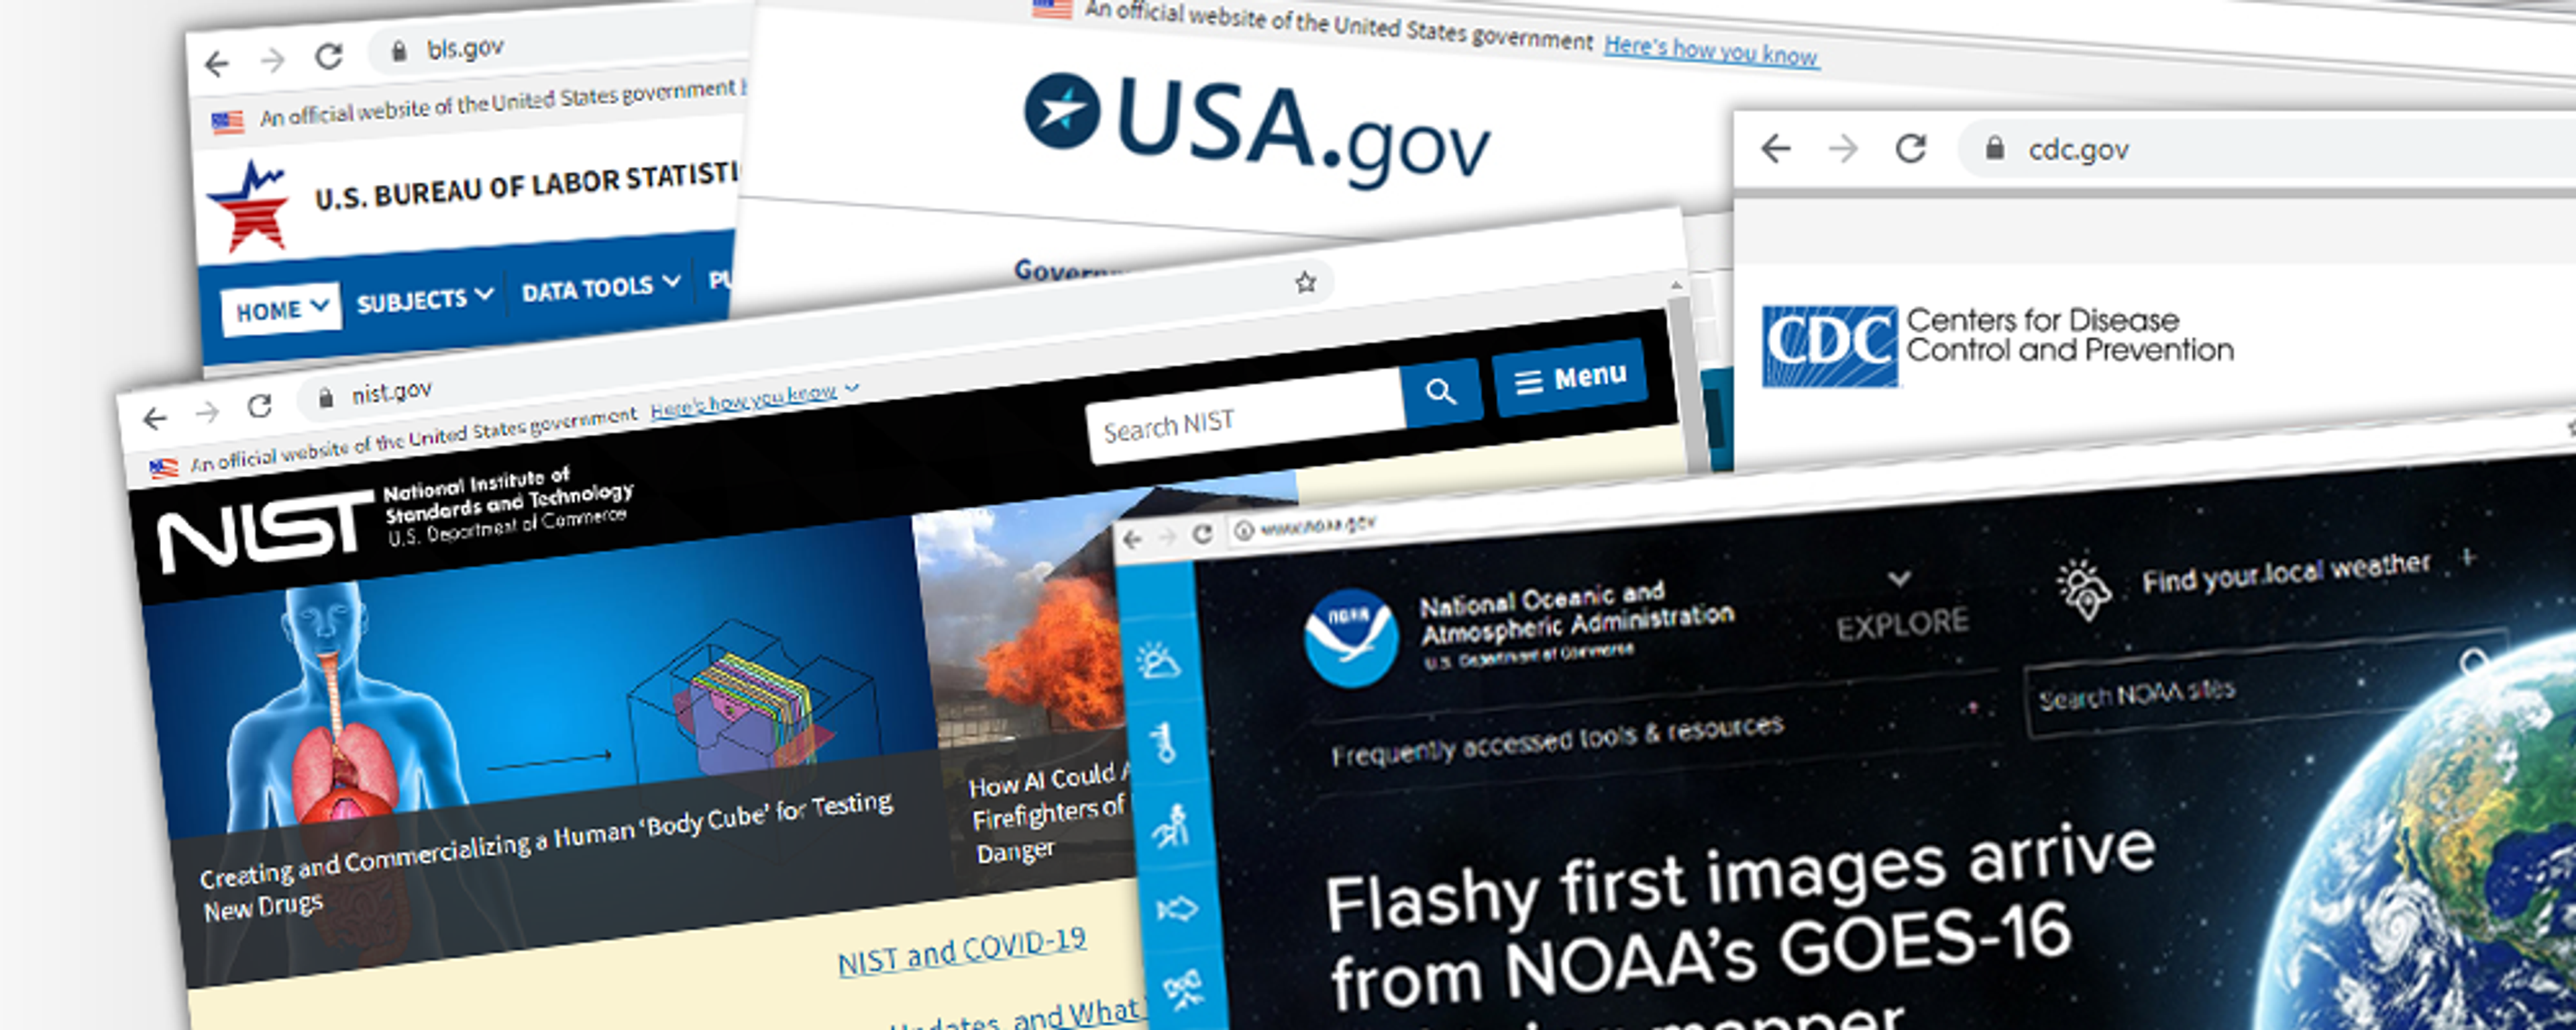 Improving Accessibility of Federal Government Websites